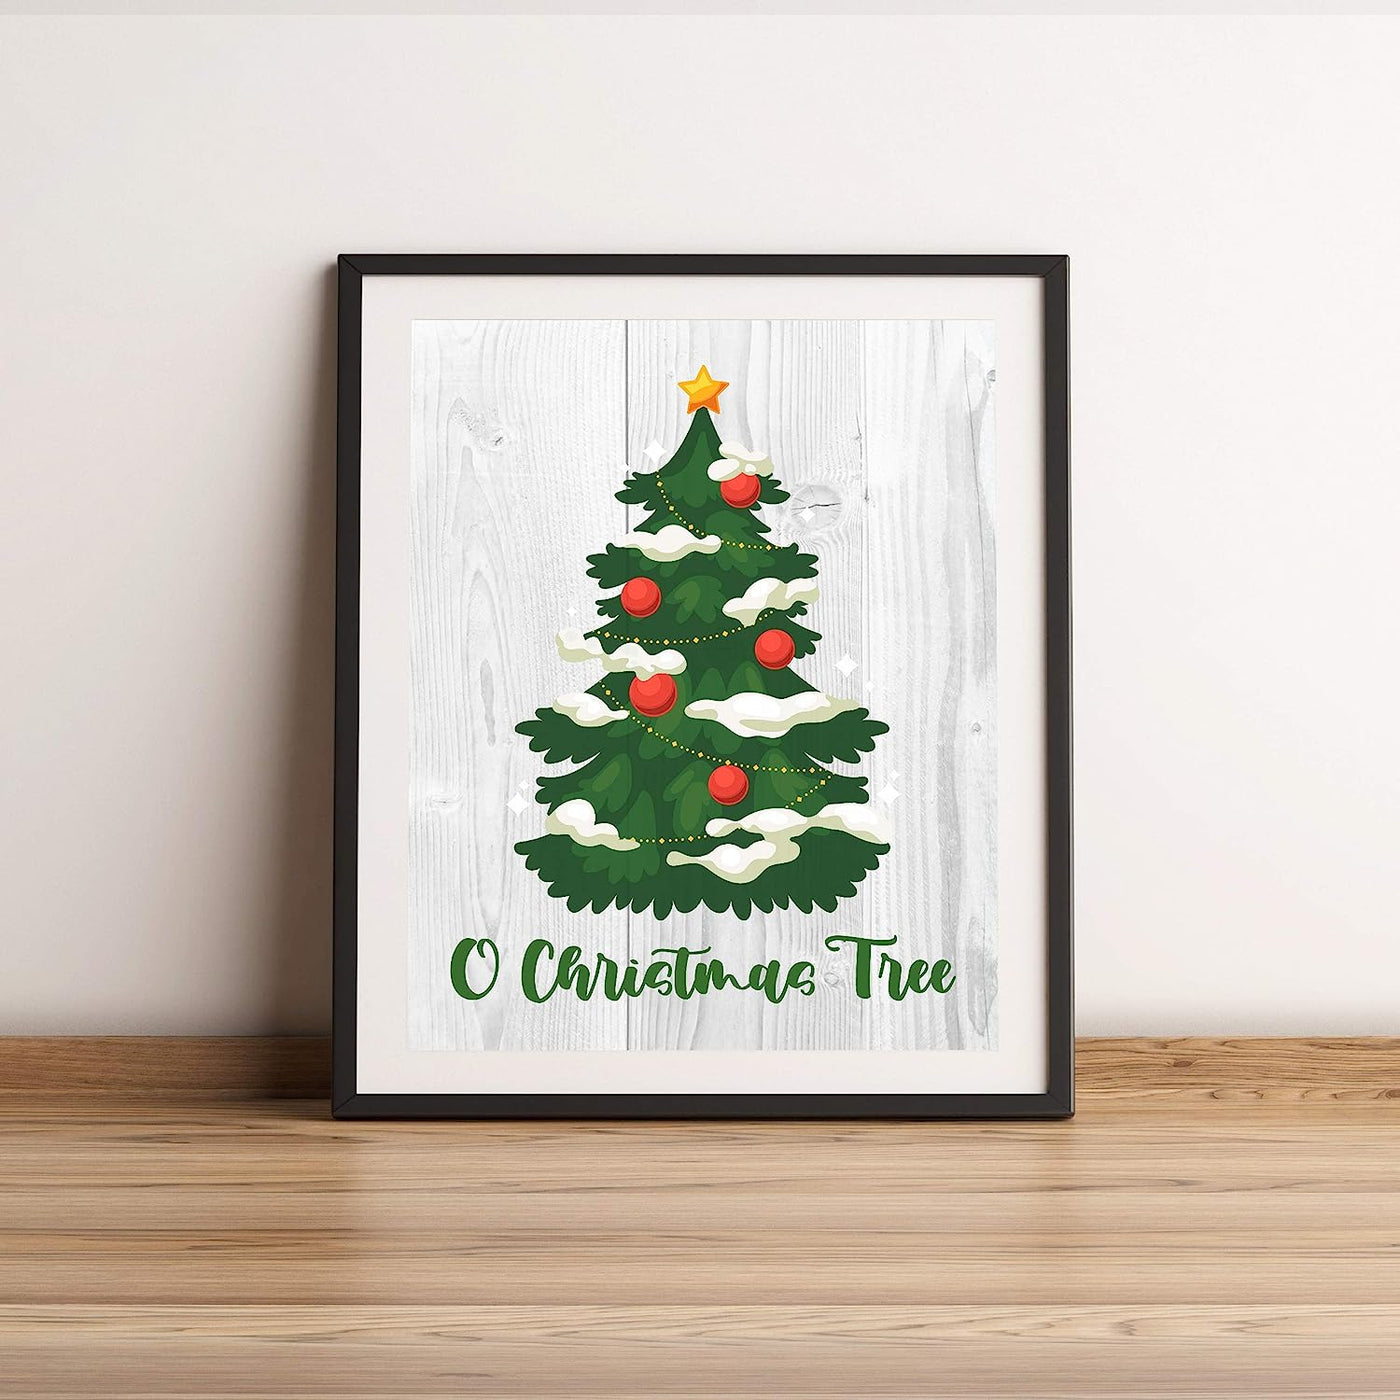 O Christmas Tree Holiday Song Art- Rustic Farmhouse Decor -11 x 14" Christmas Tree Wall Print w/Replica Wood Design-Ready to Frame. Perfect Home-Kitchen-Welcome-Entryway Decor. Printed on Paper.